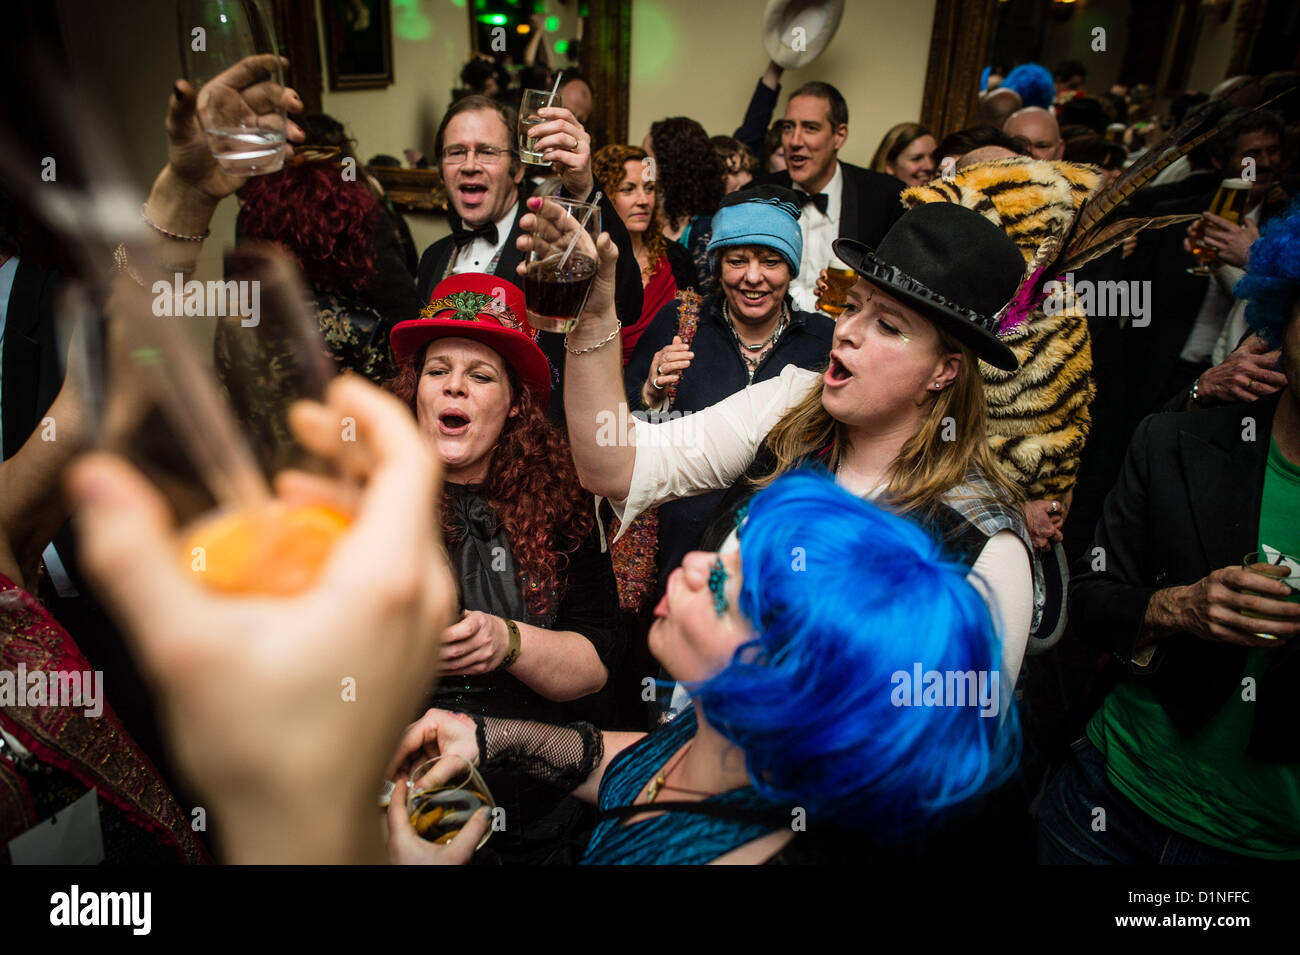 Nanteos Mansion, Aberystwyth , Wales UK, December 31 2012 / January 1 2013.  Revellers celebrating the New Year at the 'Pish Posh' party at the luxury Nanteos Mansion country house hotel on the outskirts of Aberystwyth UK. Set in acres of private parkland the party-goers had no worries of disturbing the neighbours as they danced into the early hours of 2013. Photo ©keith morris Stock Photo